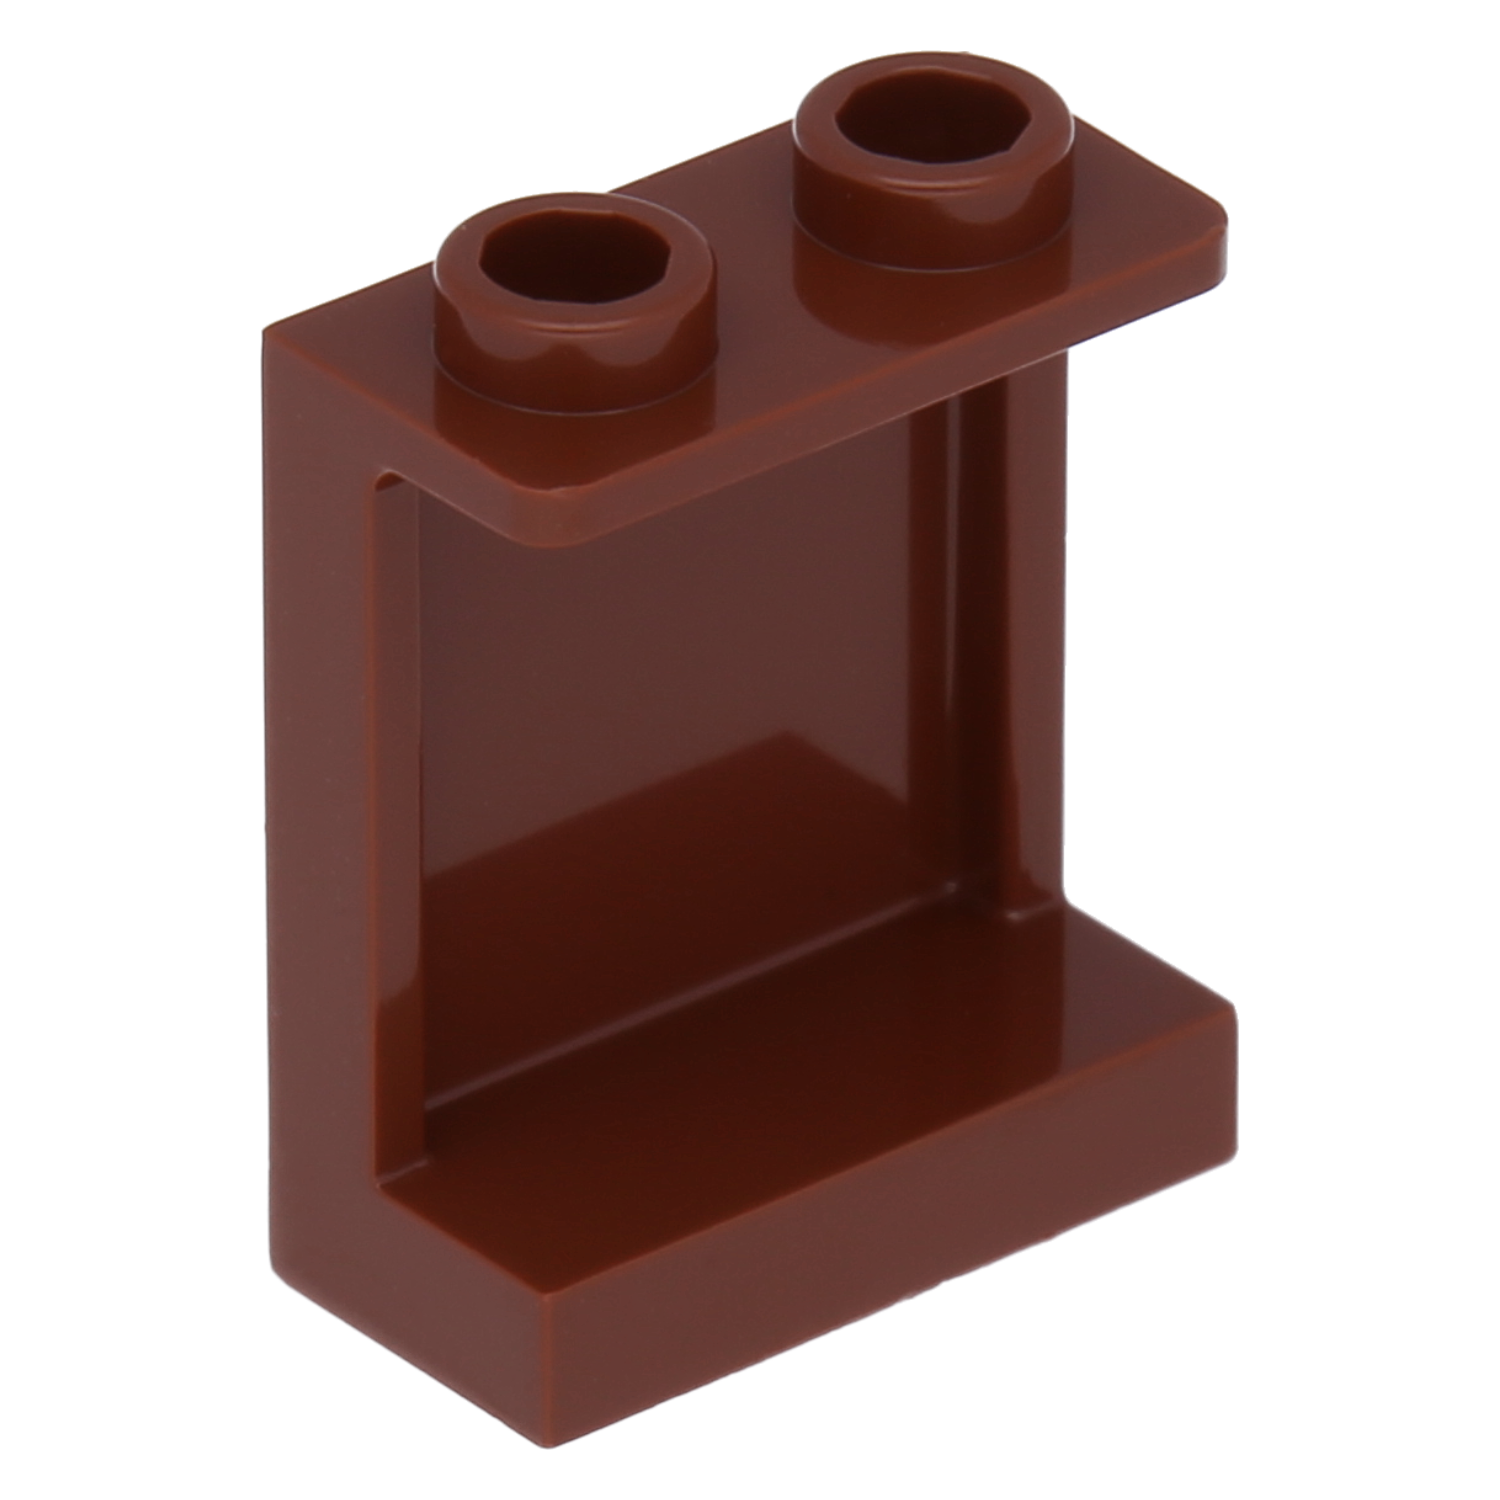 LEGO PANELE - 1 x 2 x 2 with side support (hollow knobs)